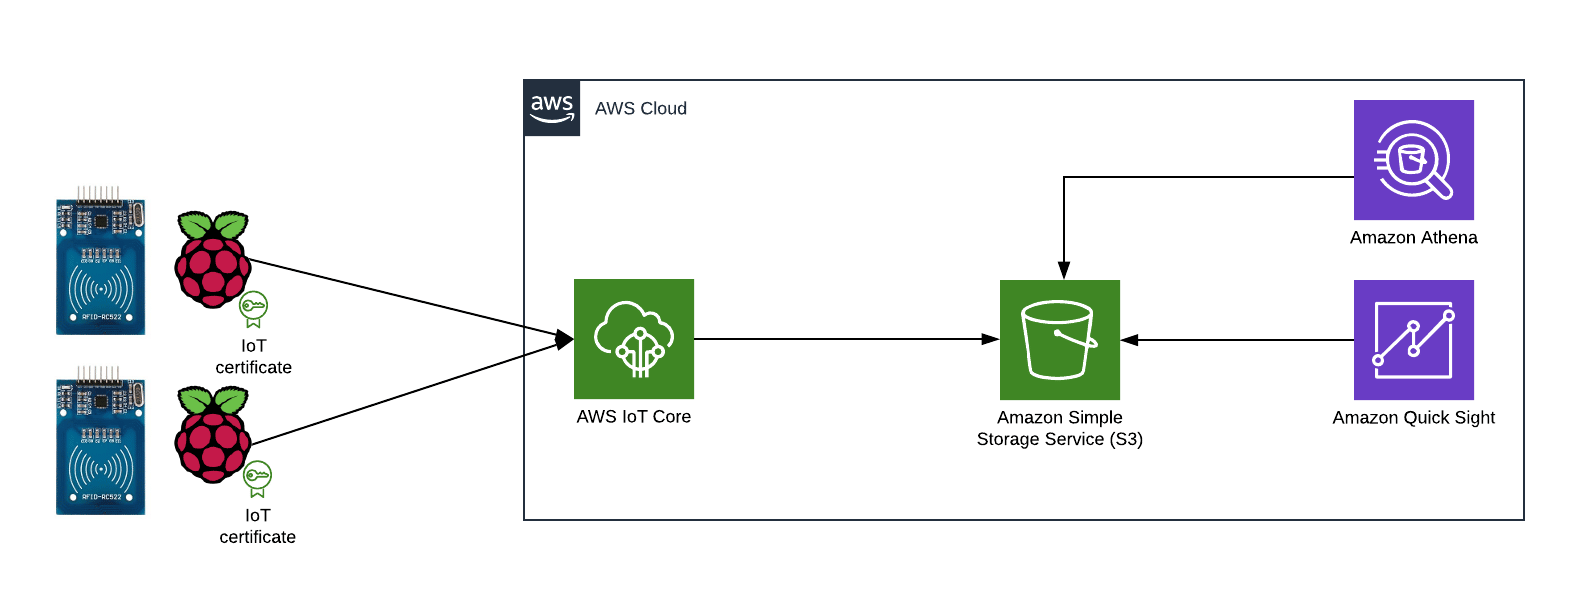 AWS IoT and AWS Cloud Architecture diagram